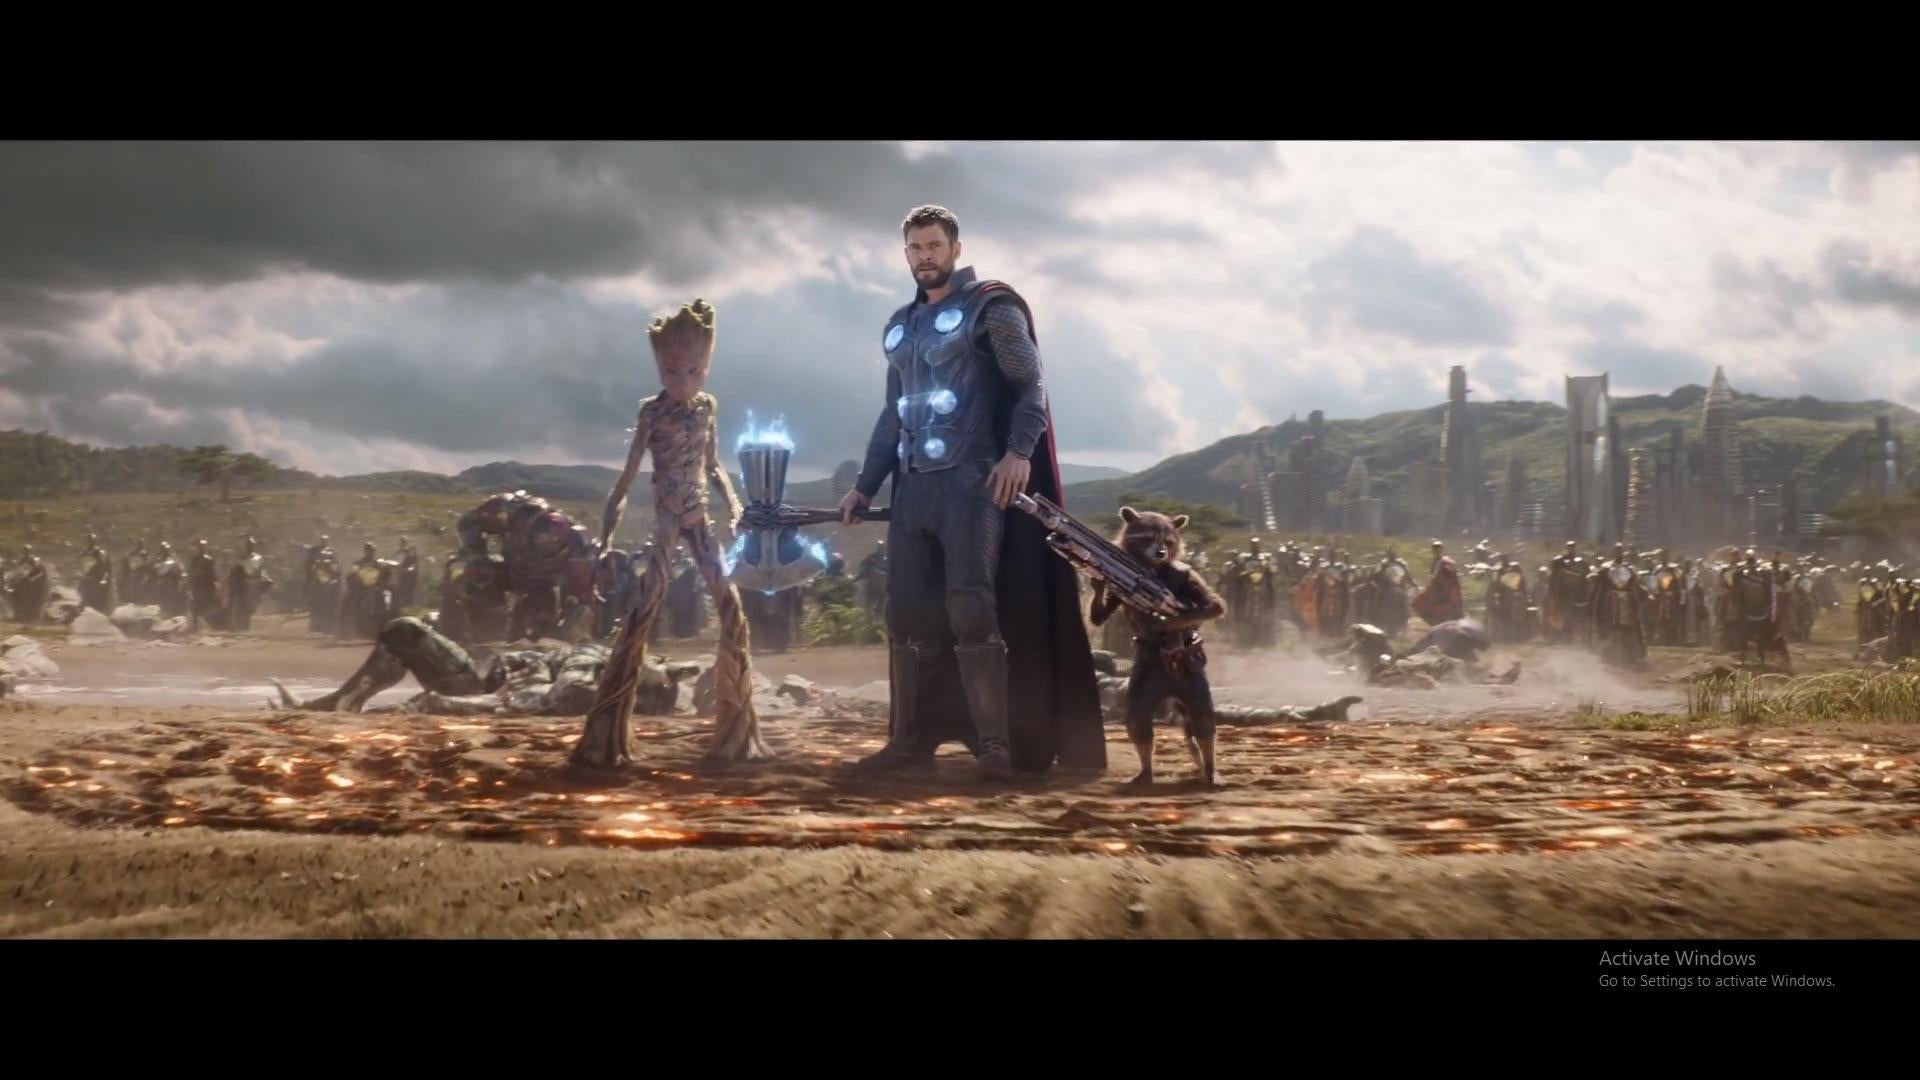 I thought ''Thor enters wakanda'' would live in MCU history forever as the most badass Superhero moment ever but endgame said hold my beer: marvelstudios